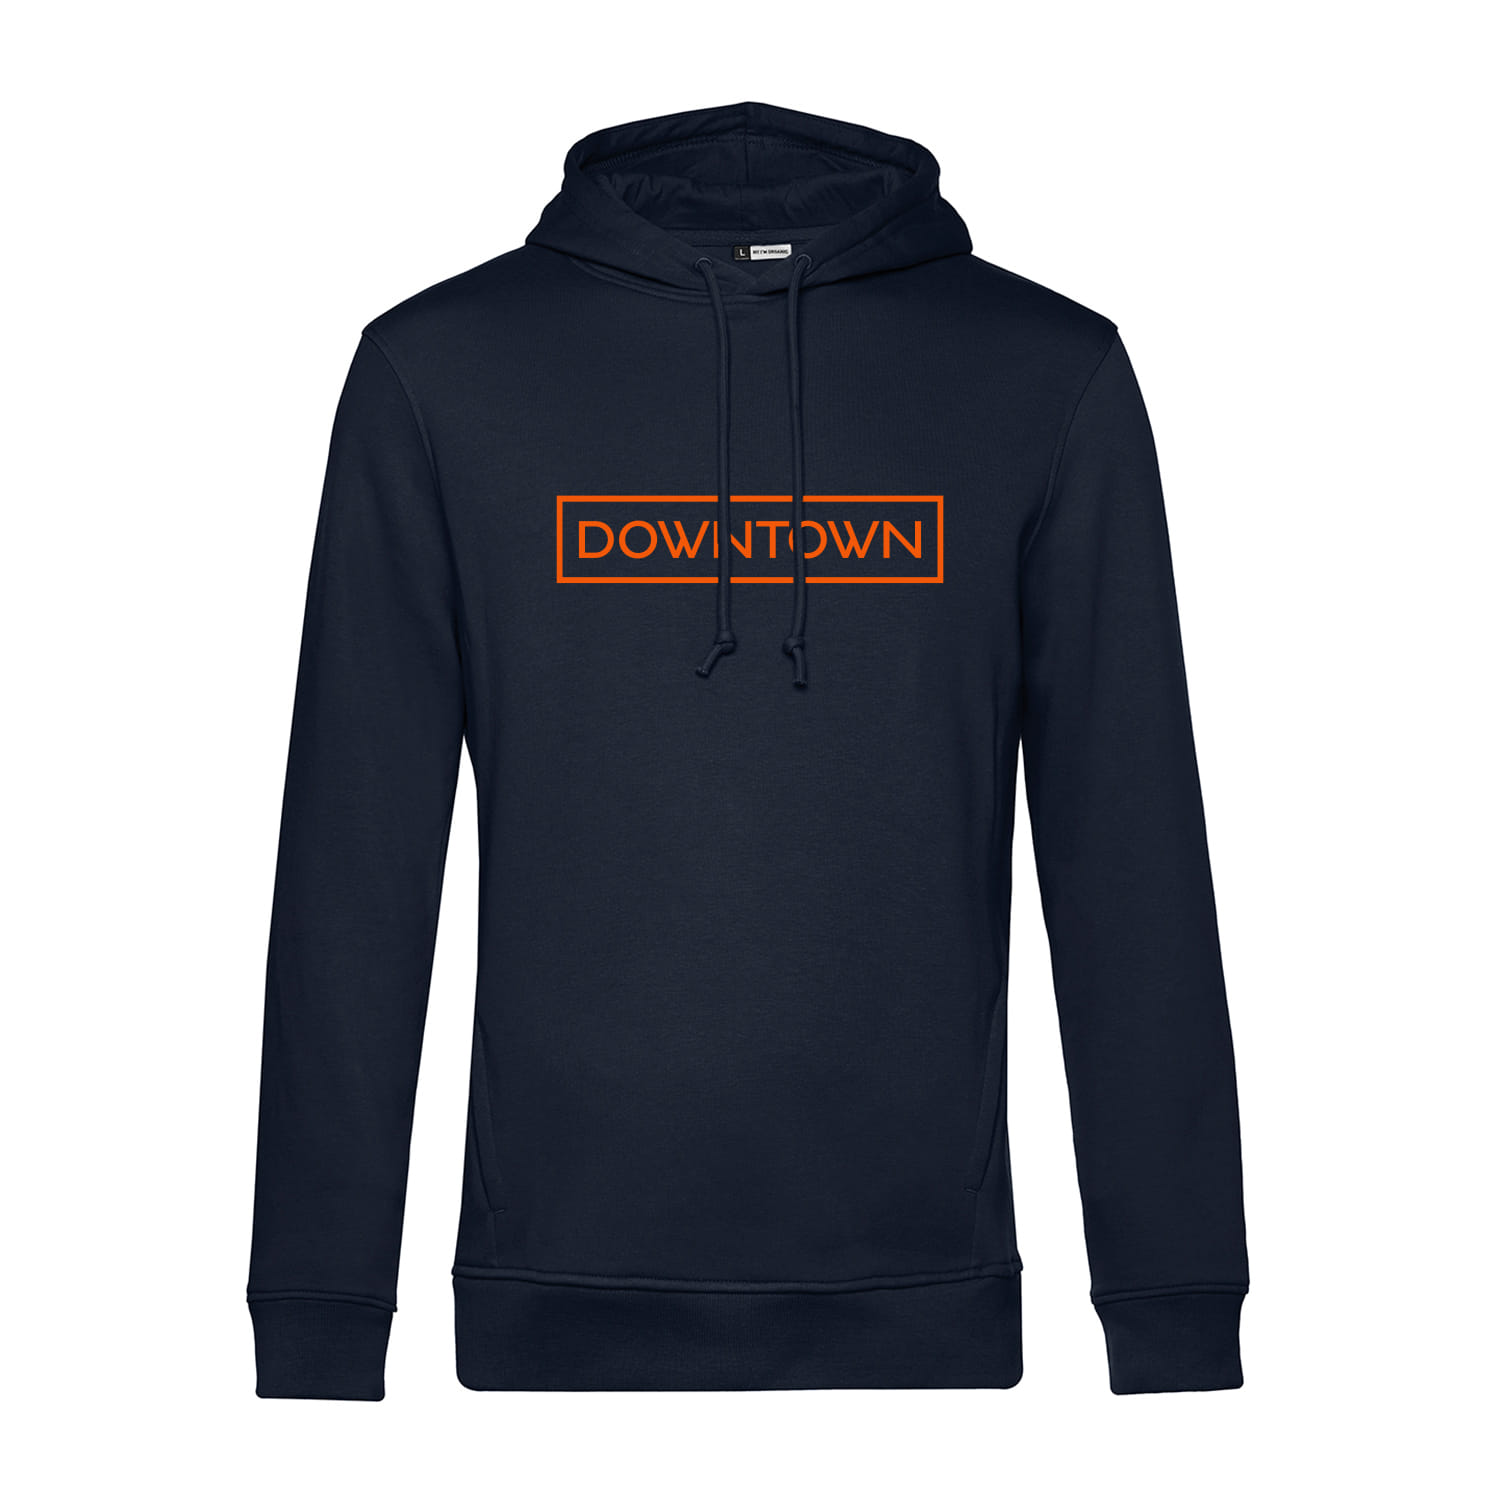 Classic Hoodie "Downtown"